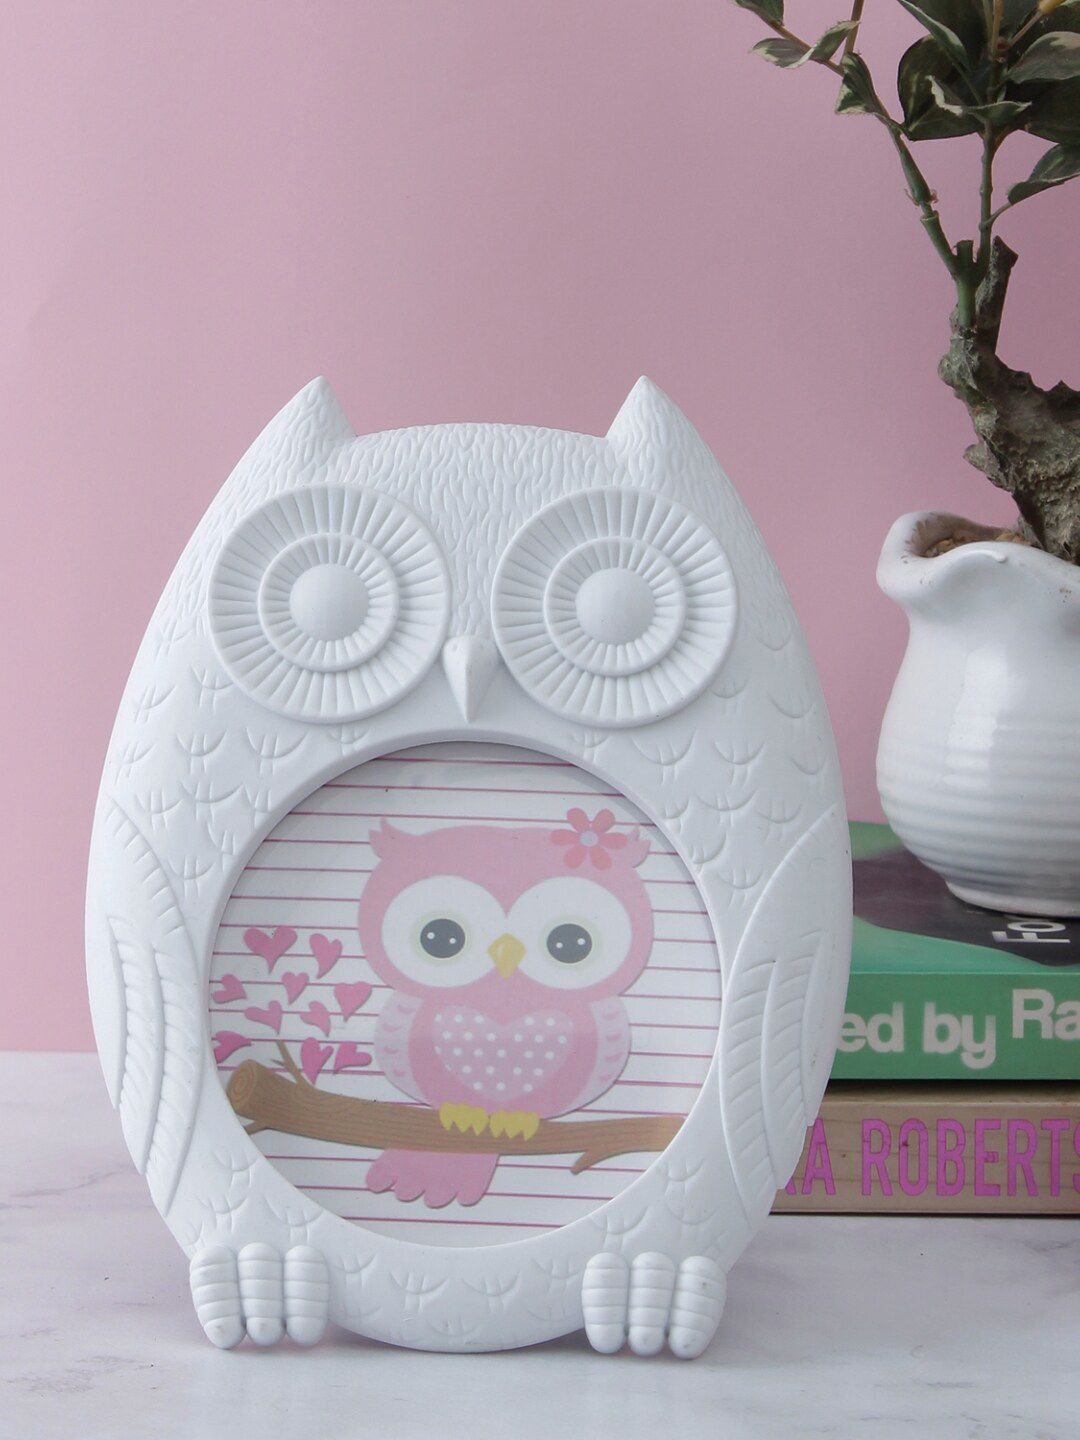 A Vintage Affair- Home Decor White Owl-Shaped Table-Top Photo Frame Price in India